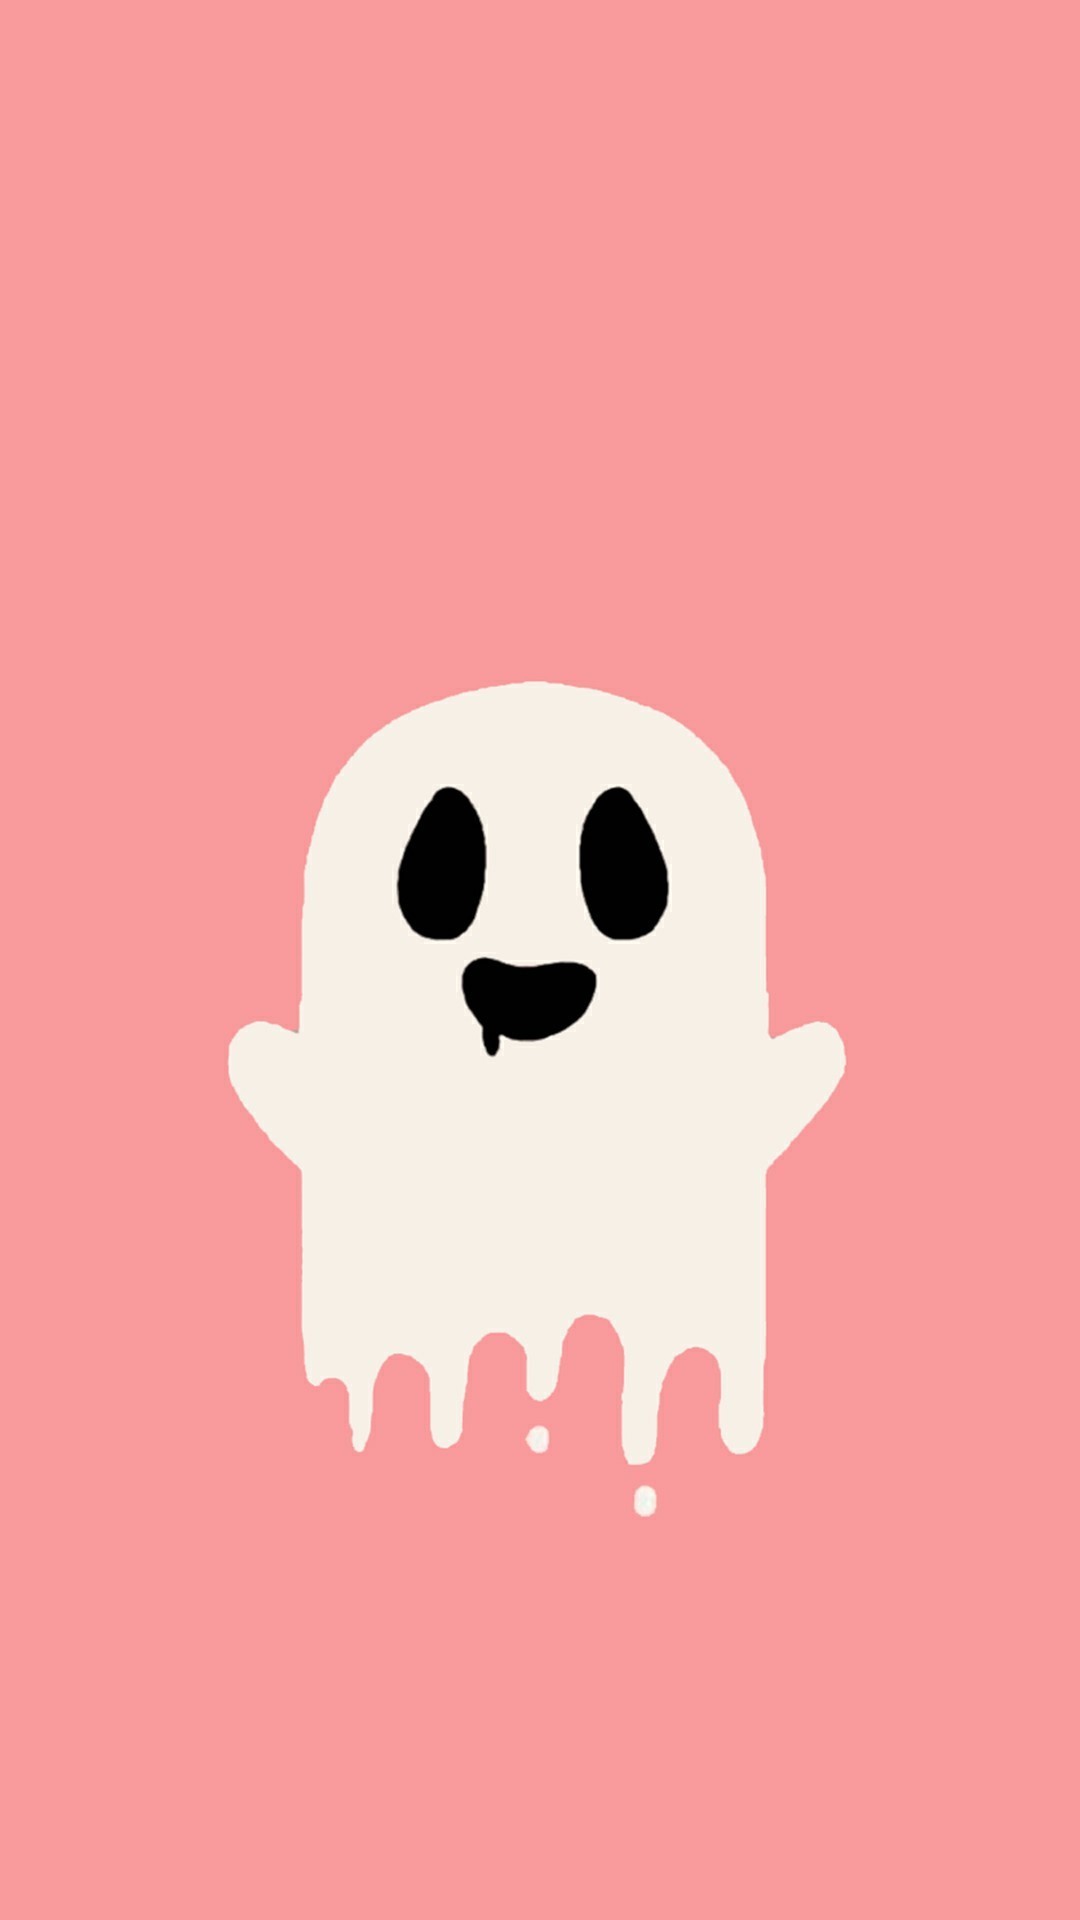 free download 63 kawaii halloween wallpapers on wallpaperplay 1080x1920 for your desktop mobile tablet explore 47 halloween cute wallpapers cute halloween background halloween cute wallpapers cute halloween wallpaper 63 kawaii halloween wallpapers